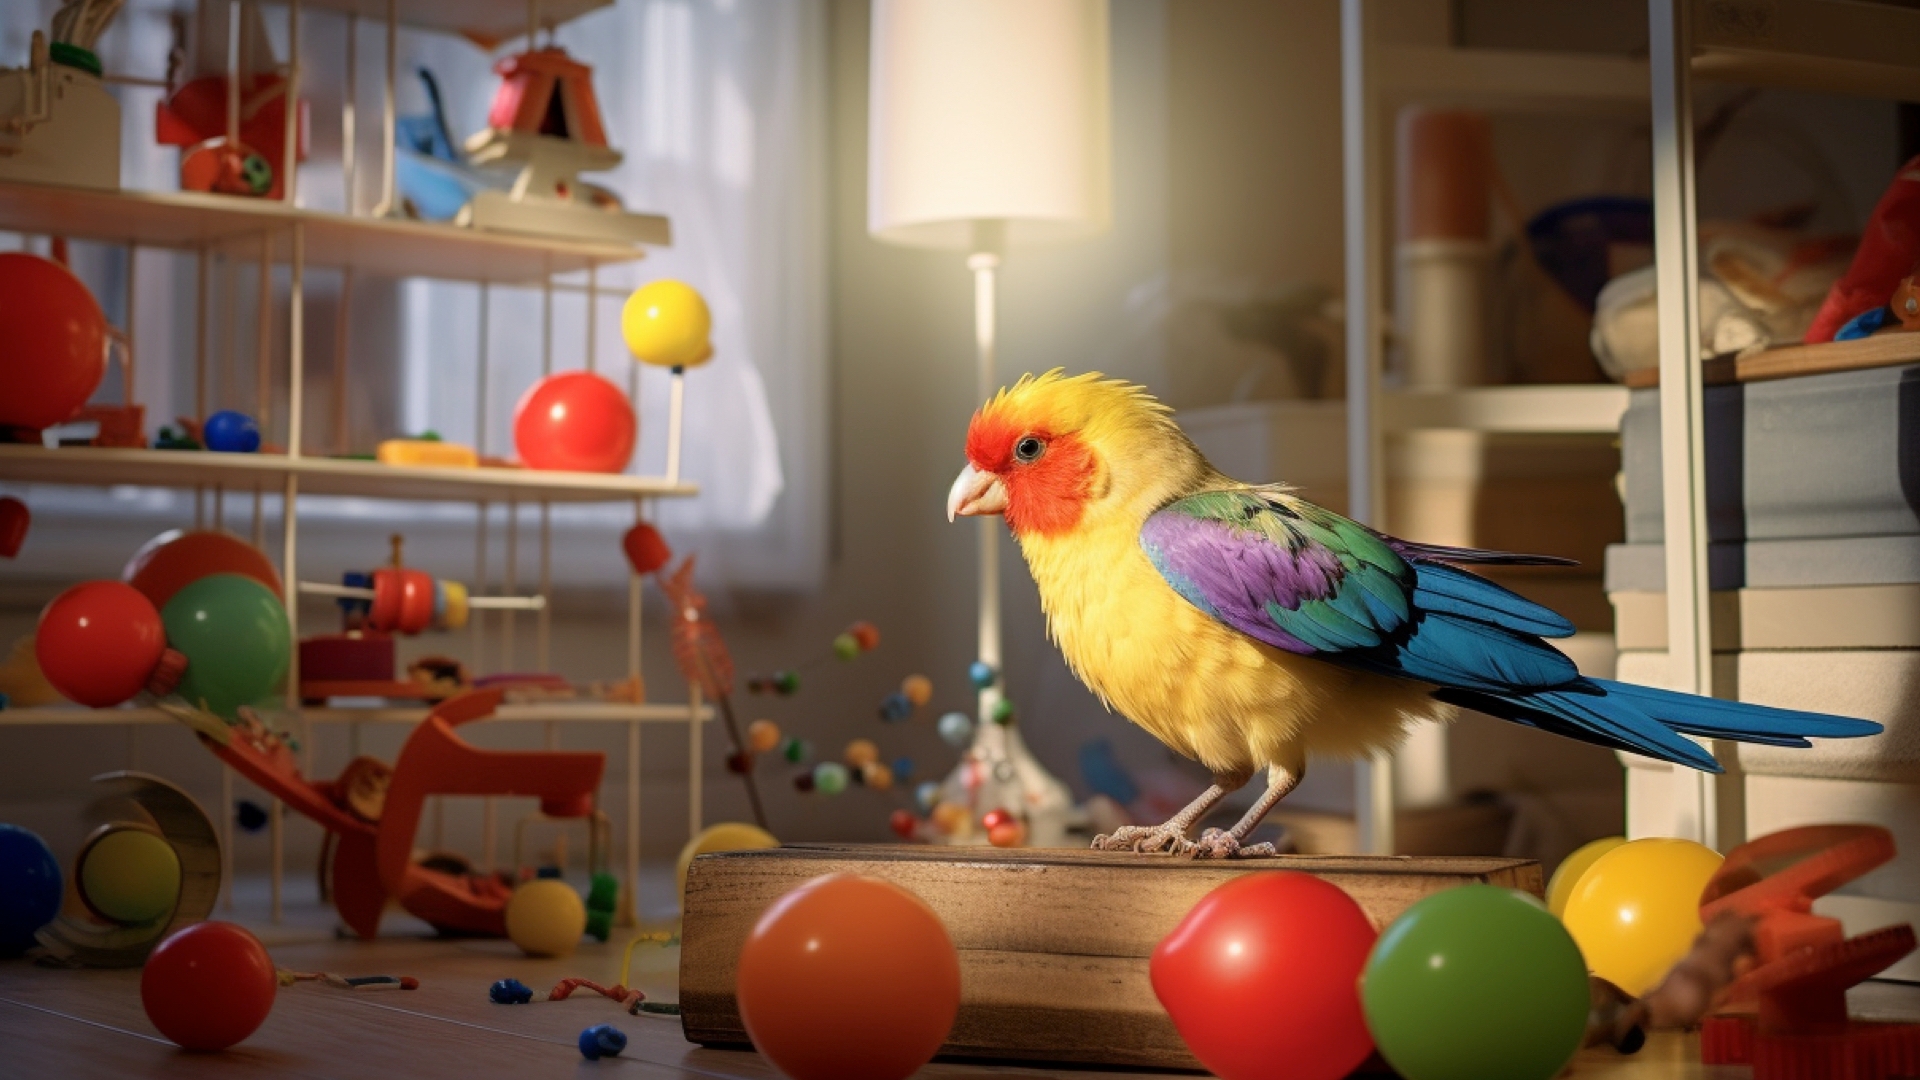 Creating Bird-Safe Spaces in Your Portland Home